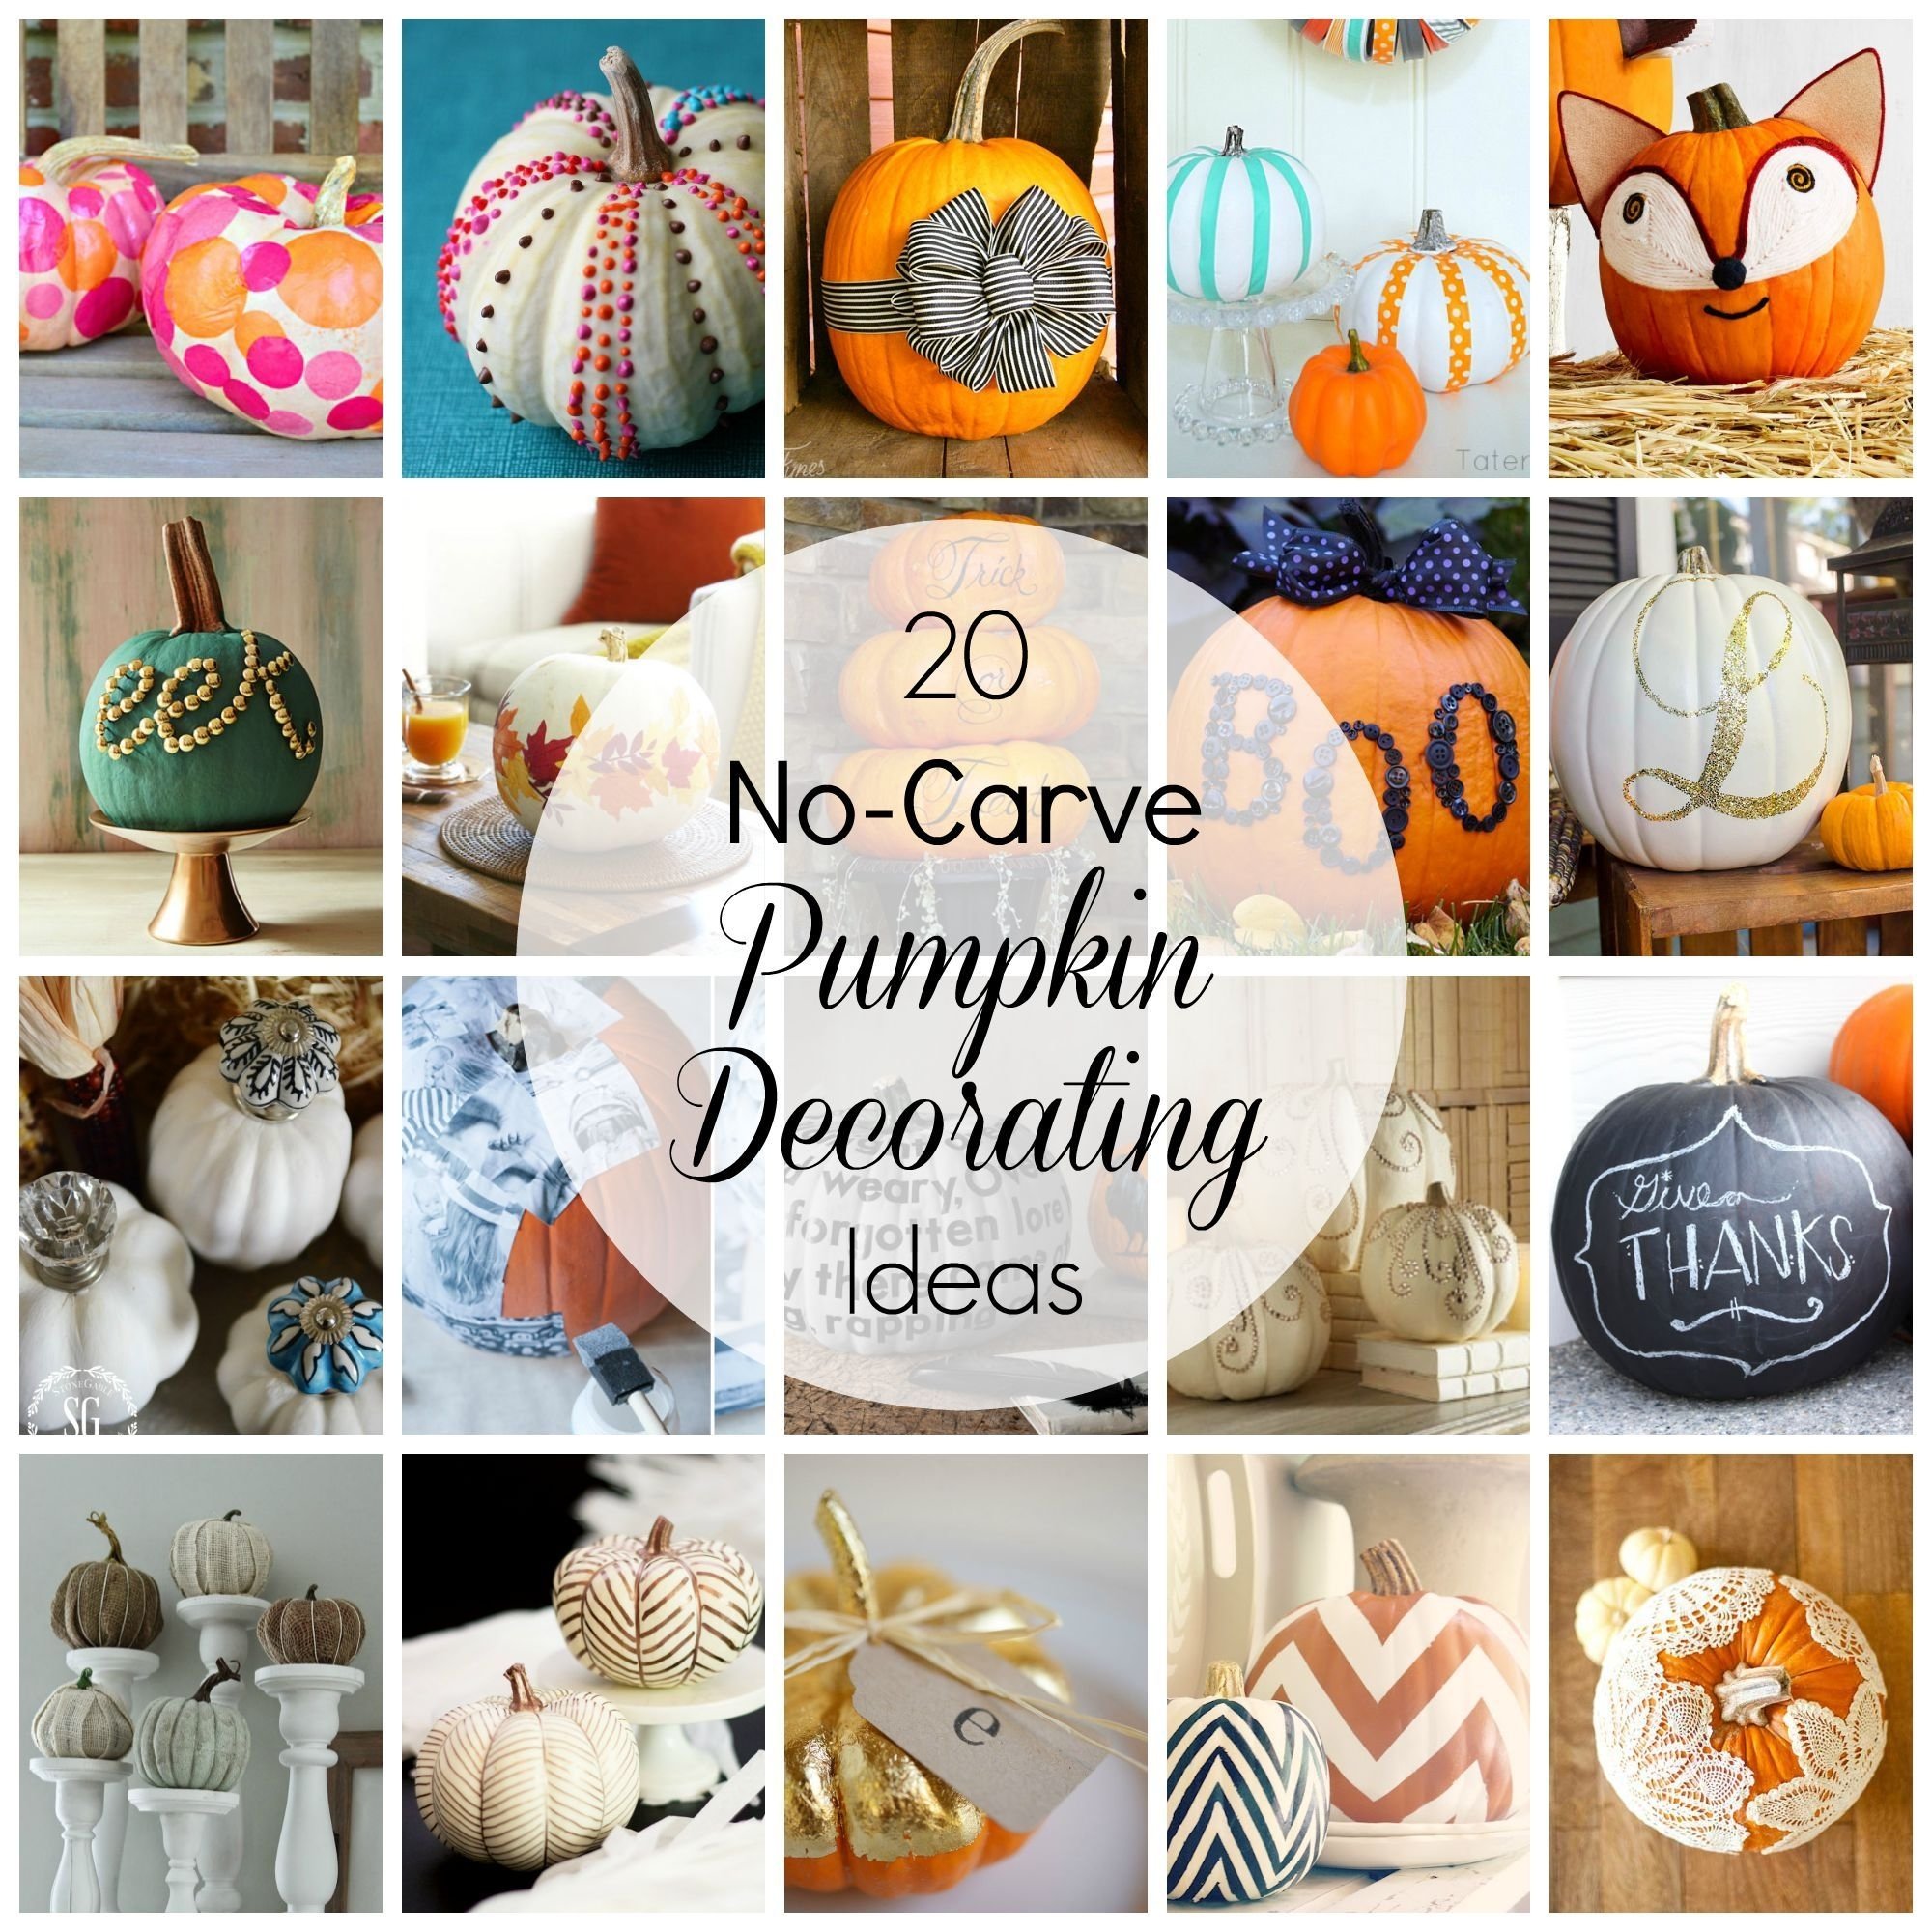 10 Wonderful No Carving Pumpkin Decorating Ideas no carve pumpkin decorating ideas pumpkin images holidays and 1 2022